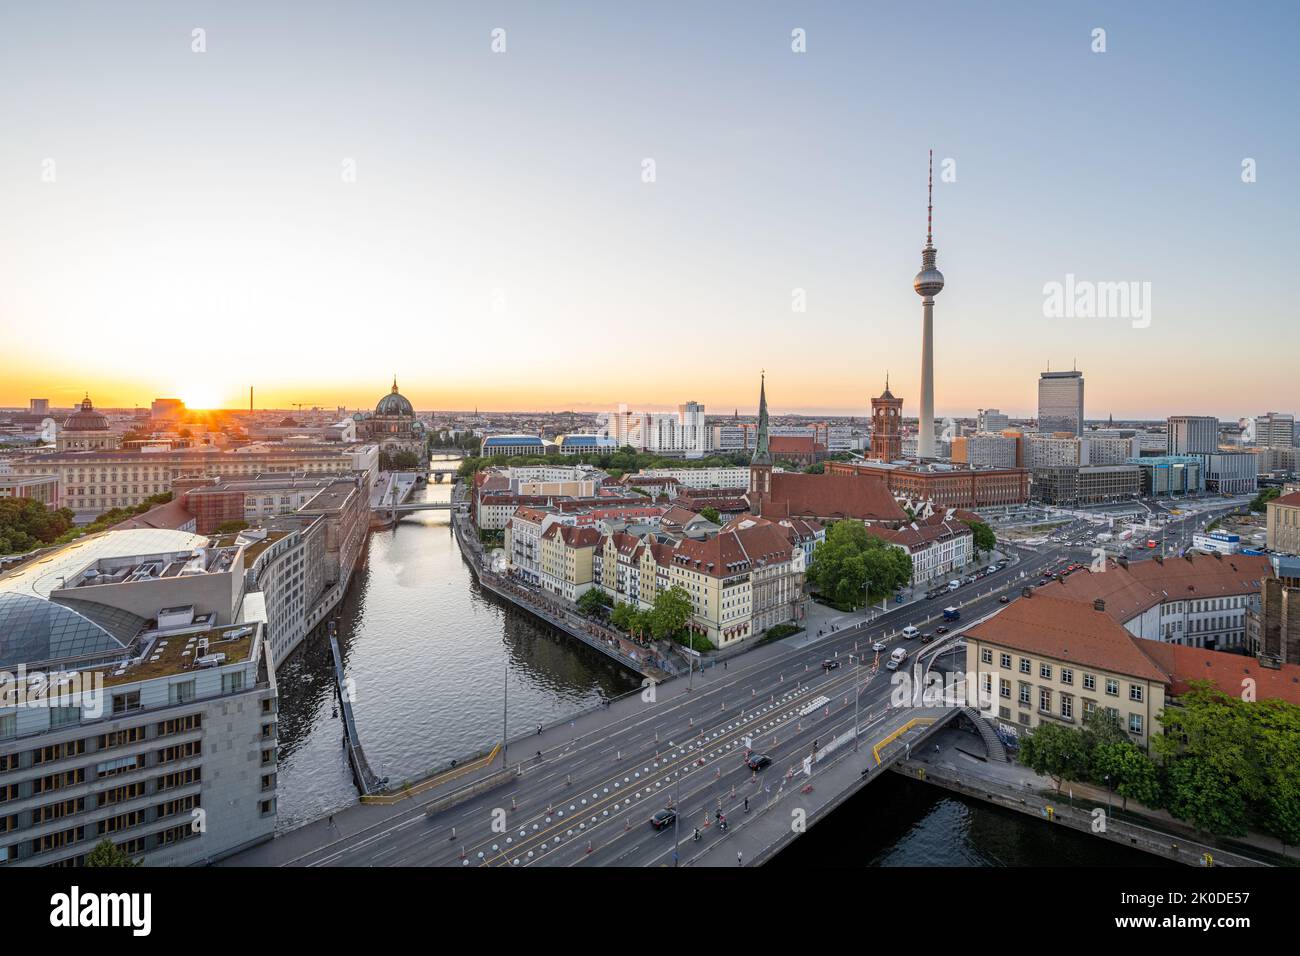 The center of Berlin with the iconic TV Tower at sunset Stock Photo